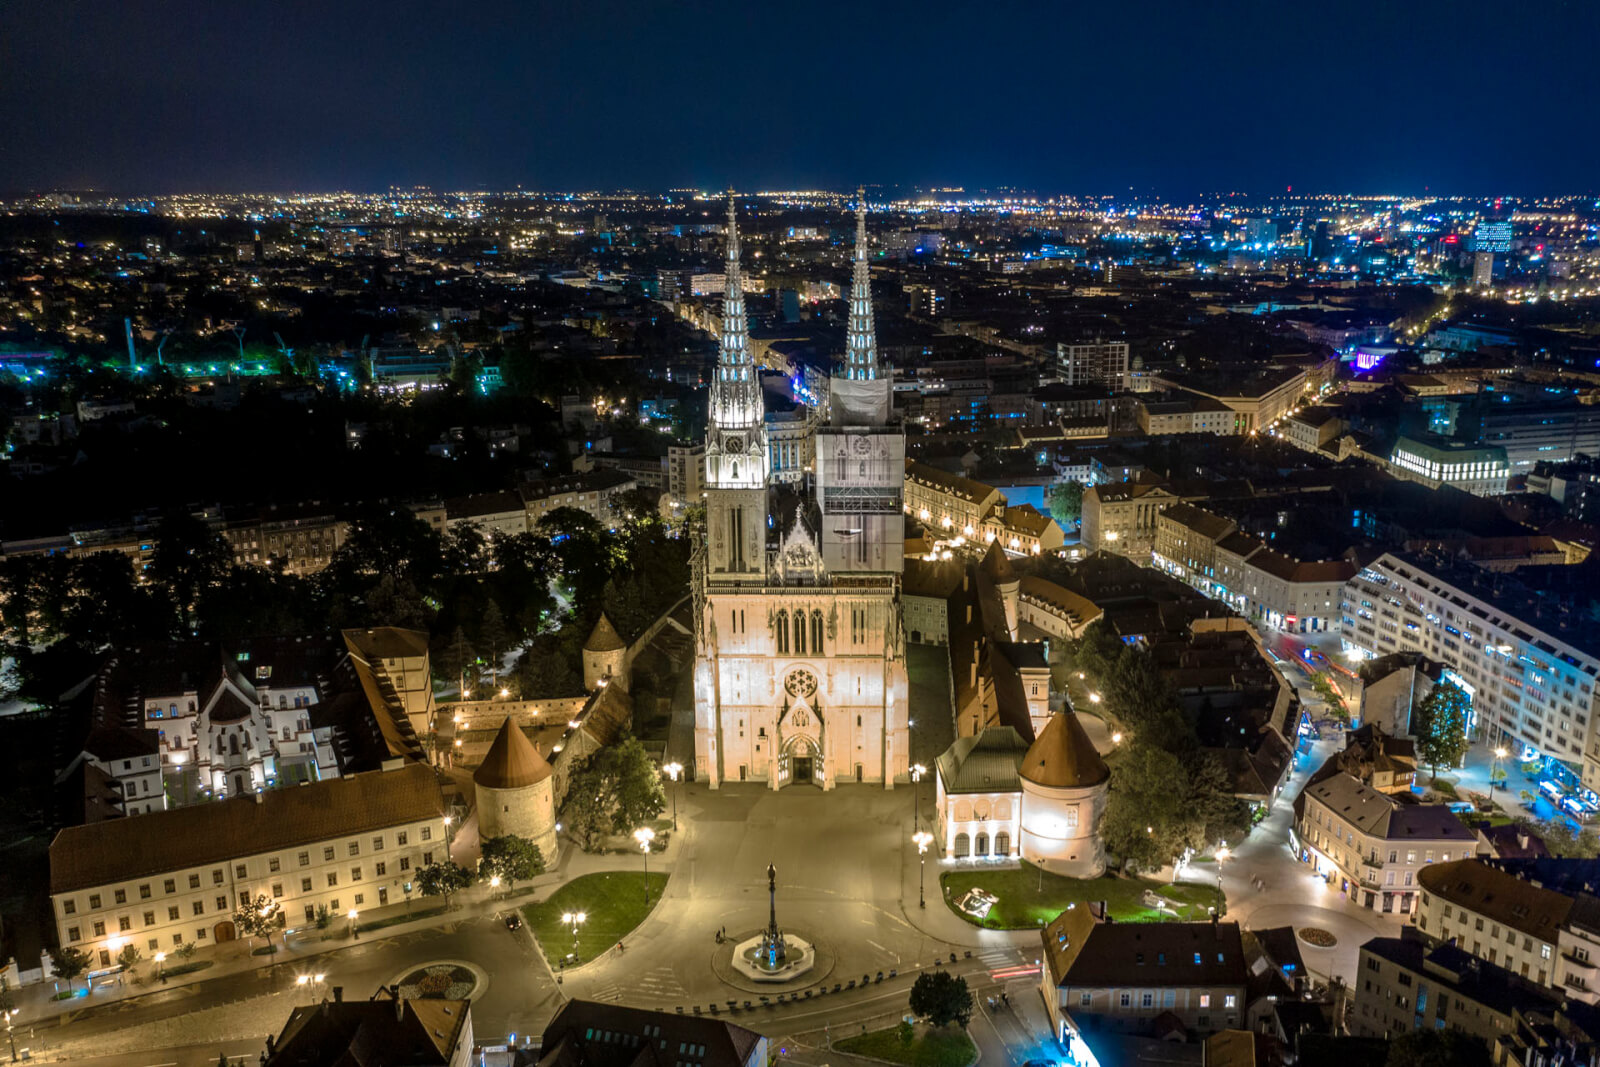 2019.06.12. The Zagreb Cathedral